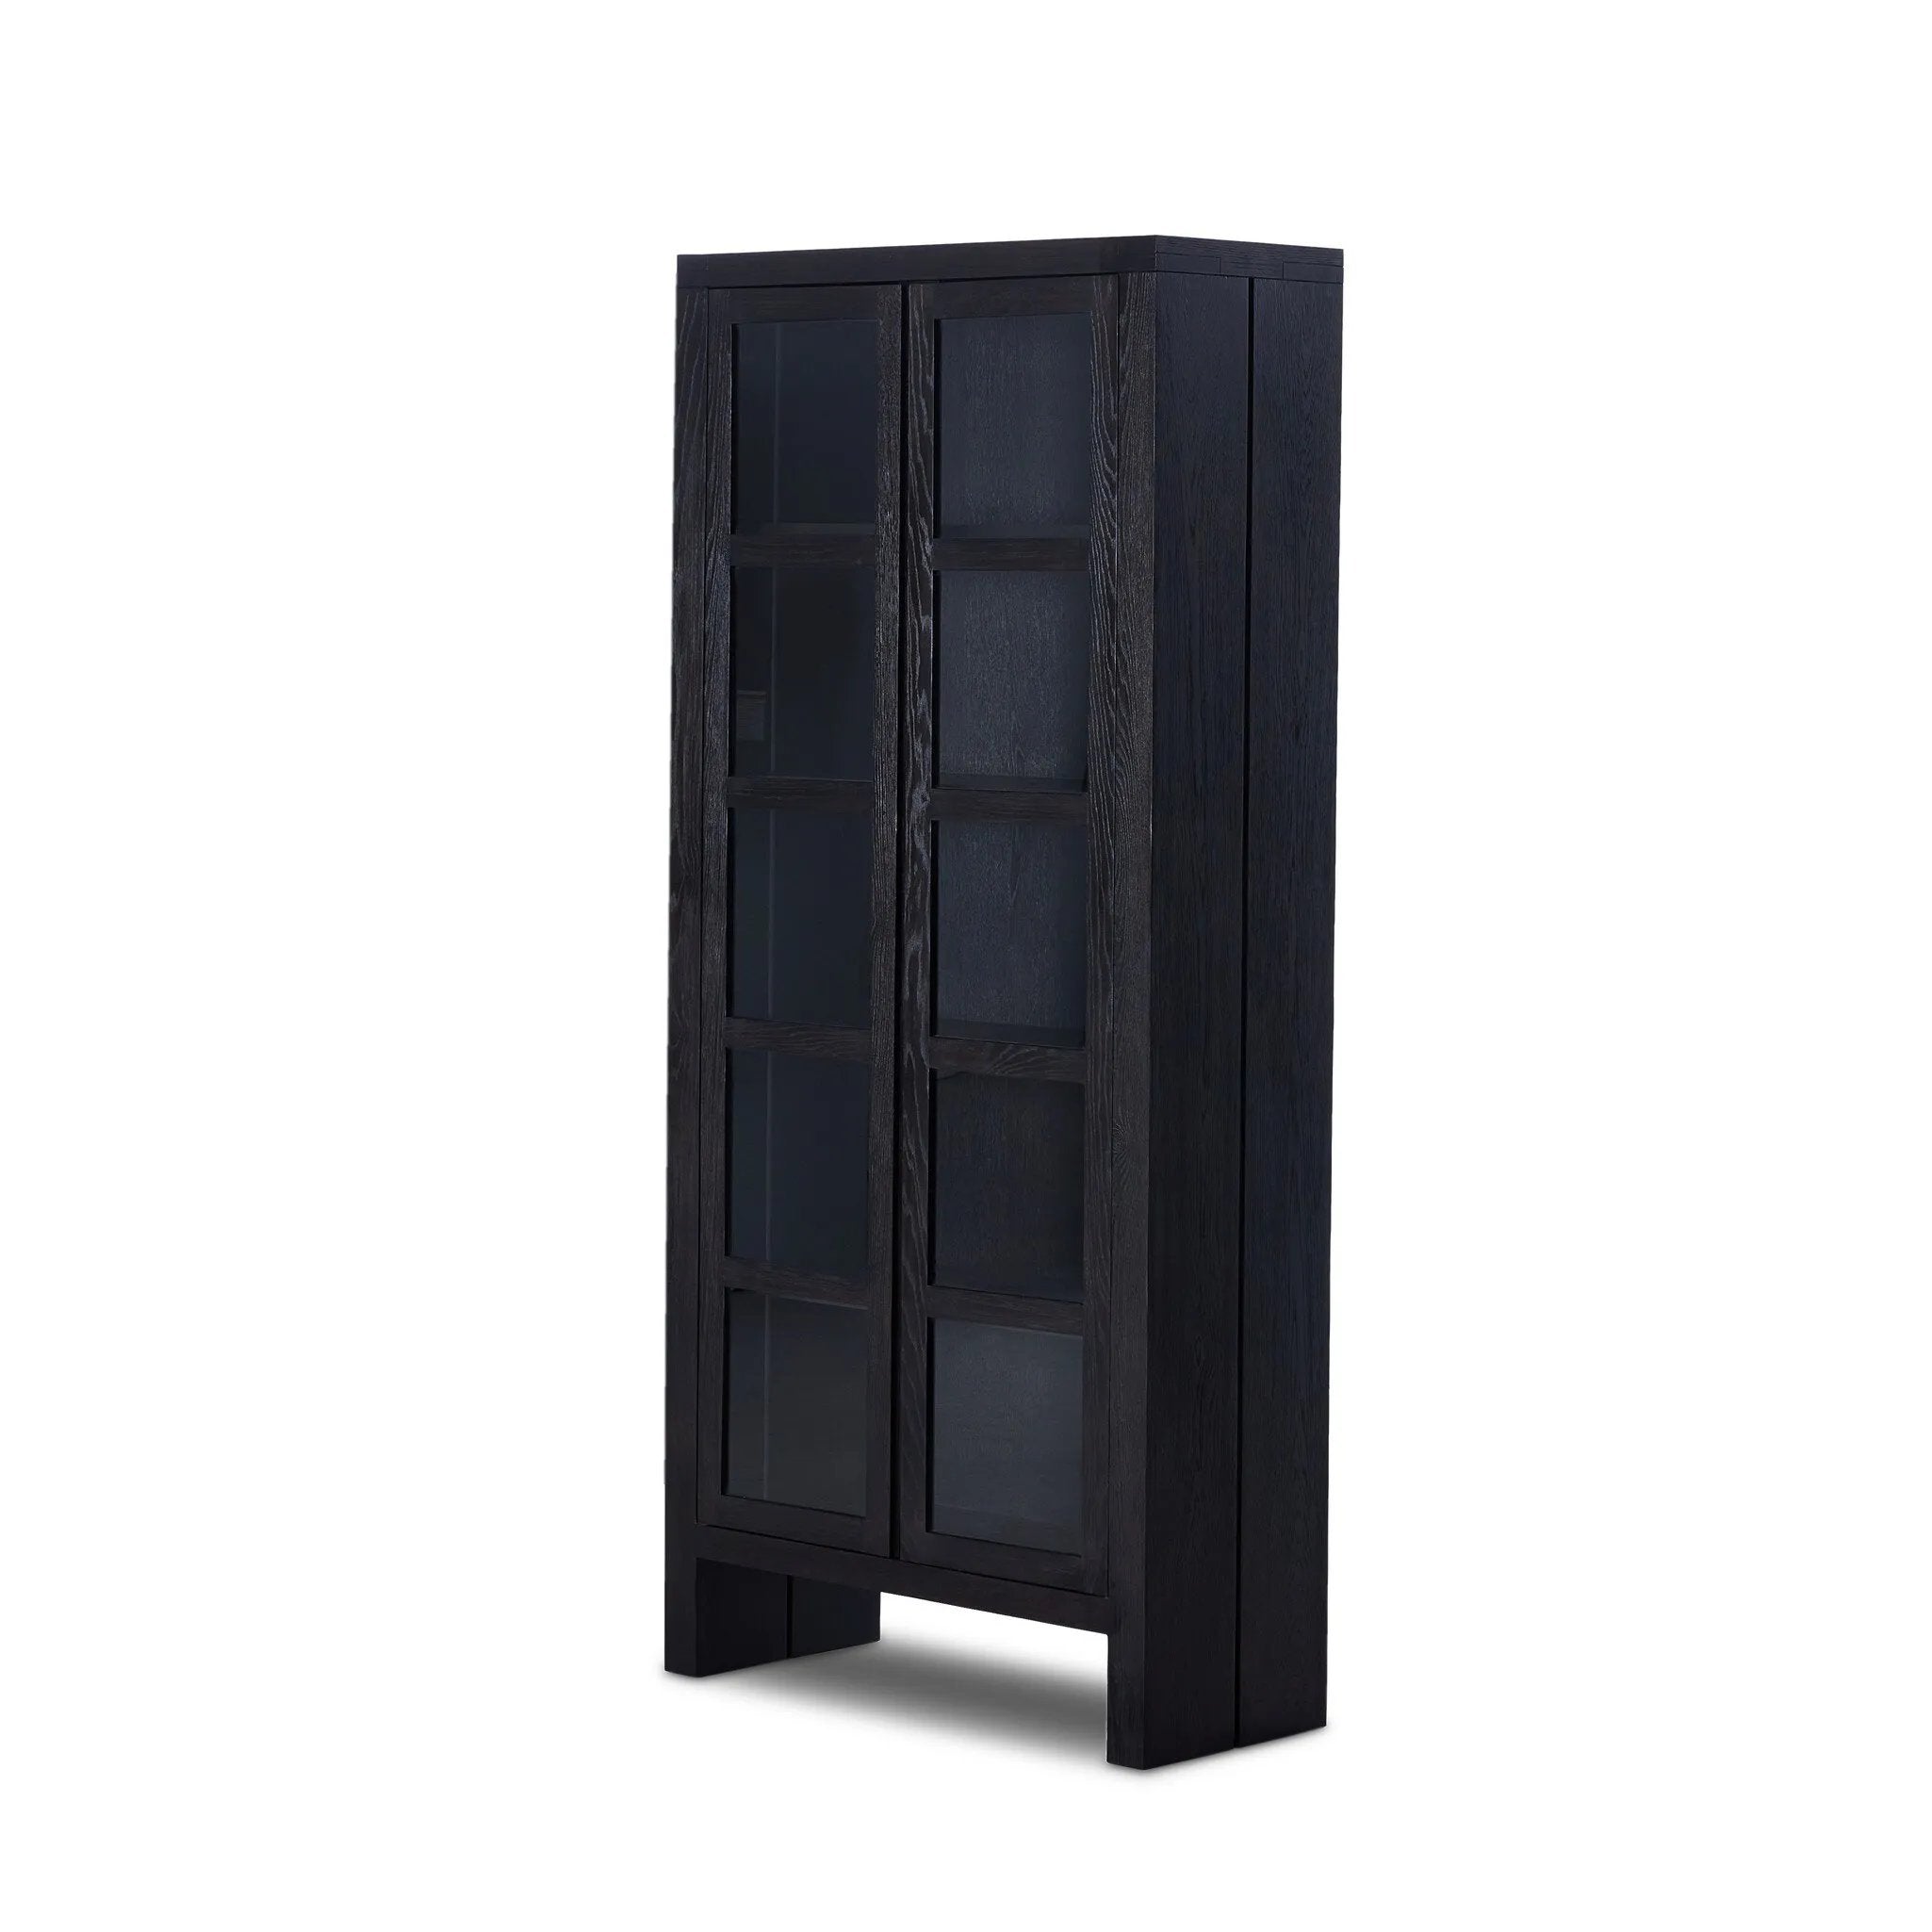 This minimal-inspired bookcase is crafted from a mix of solid oak and worn black veneer. Featuring glass-front doors and spacious shelves for storage and display.Collection: Bennet Amethyst Home provides interior design, new home construction design consulting, vintage area rugs, and lighting in the Calabasas metro area.